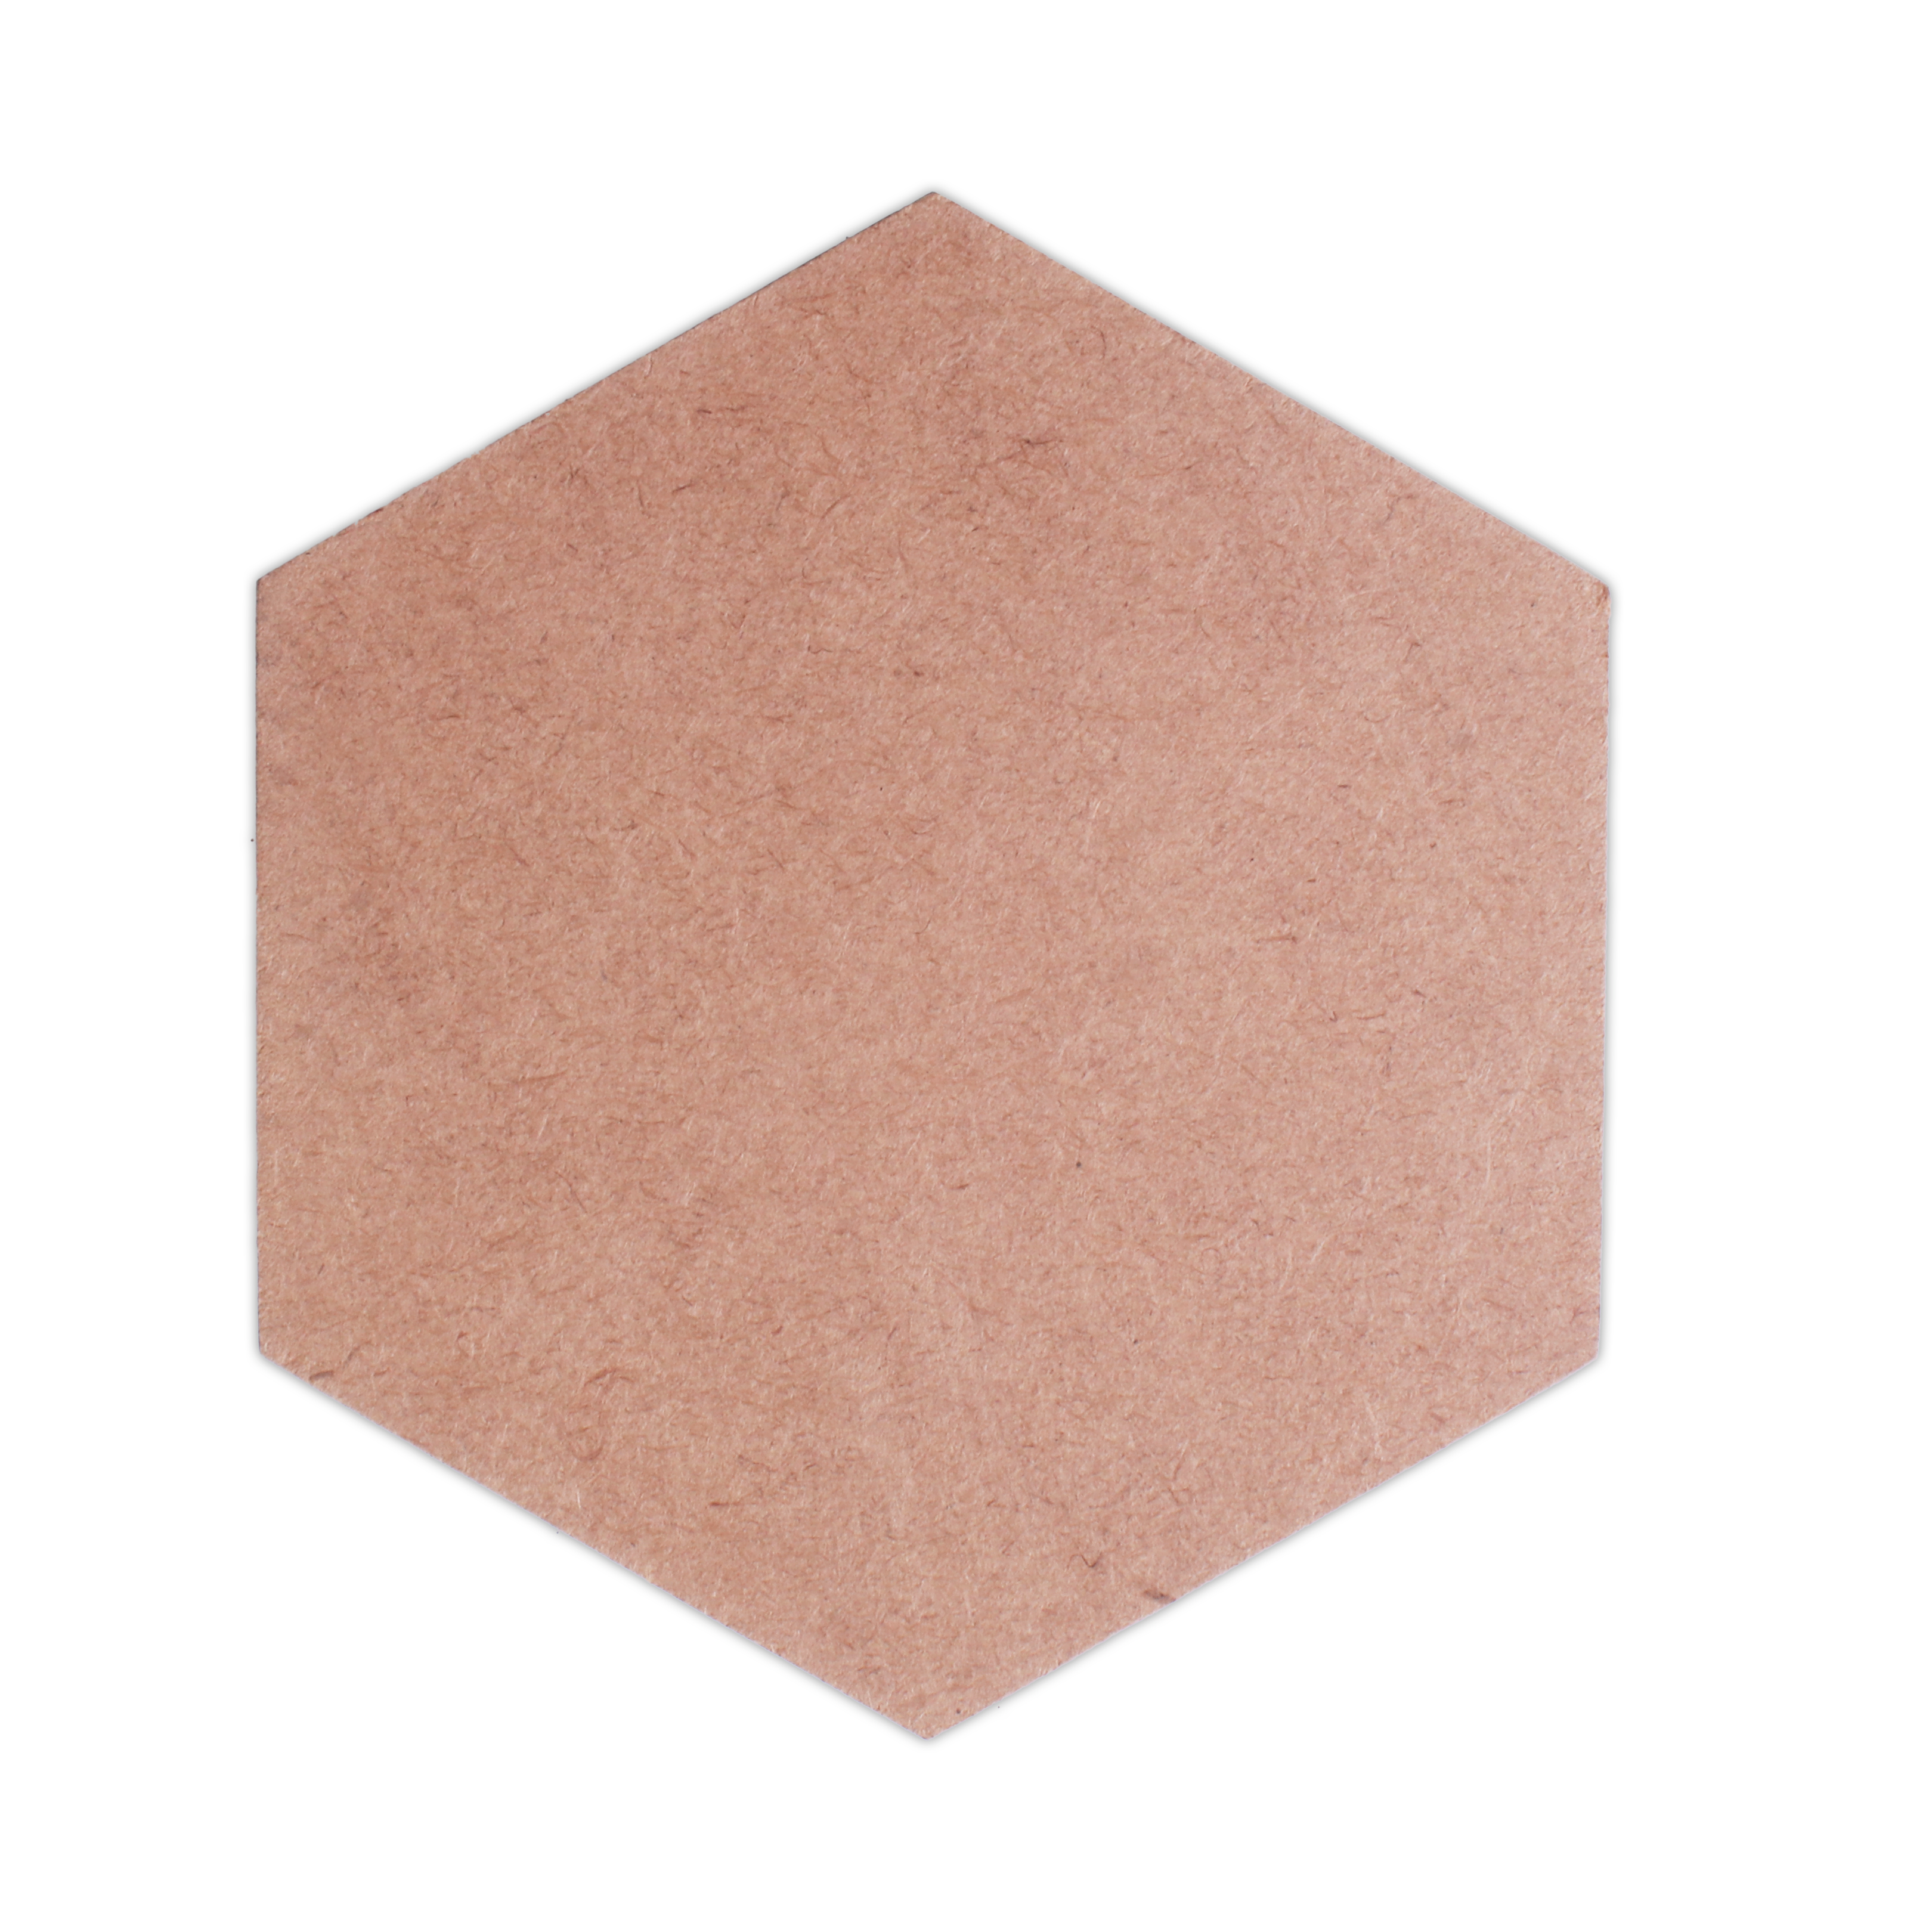 MDF Coaster Hexagon 4inch Dia 2mm Thick Set of 8pc